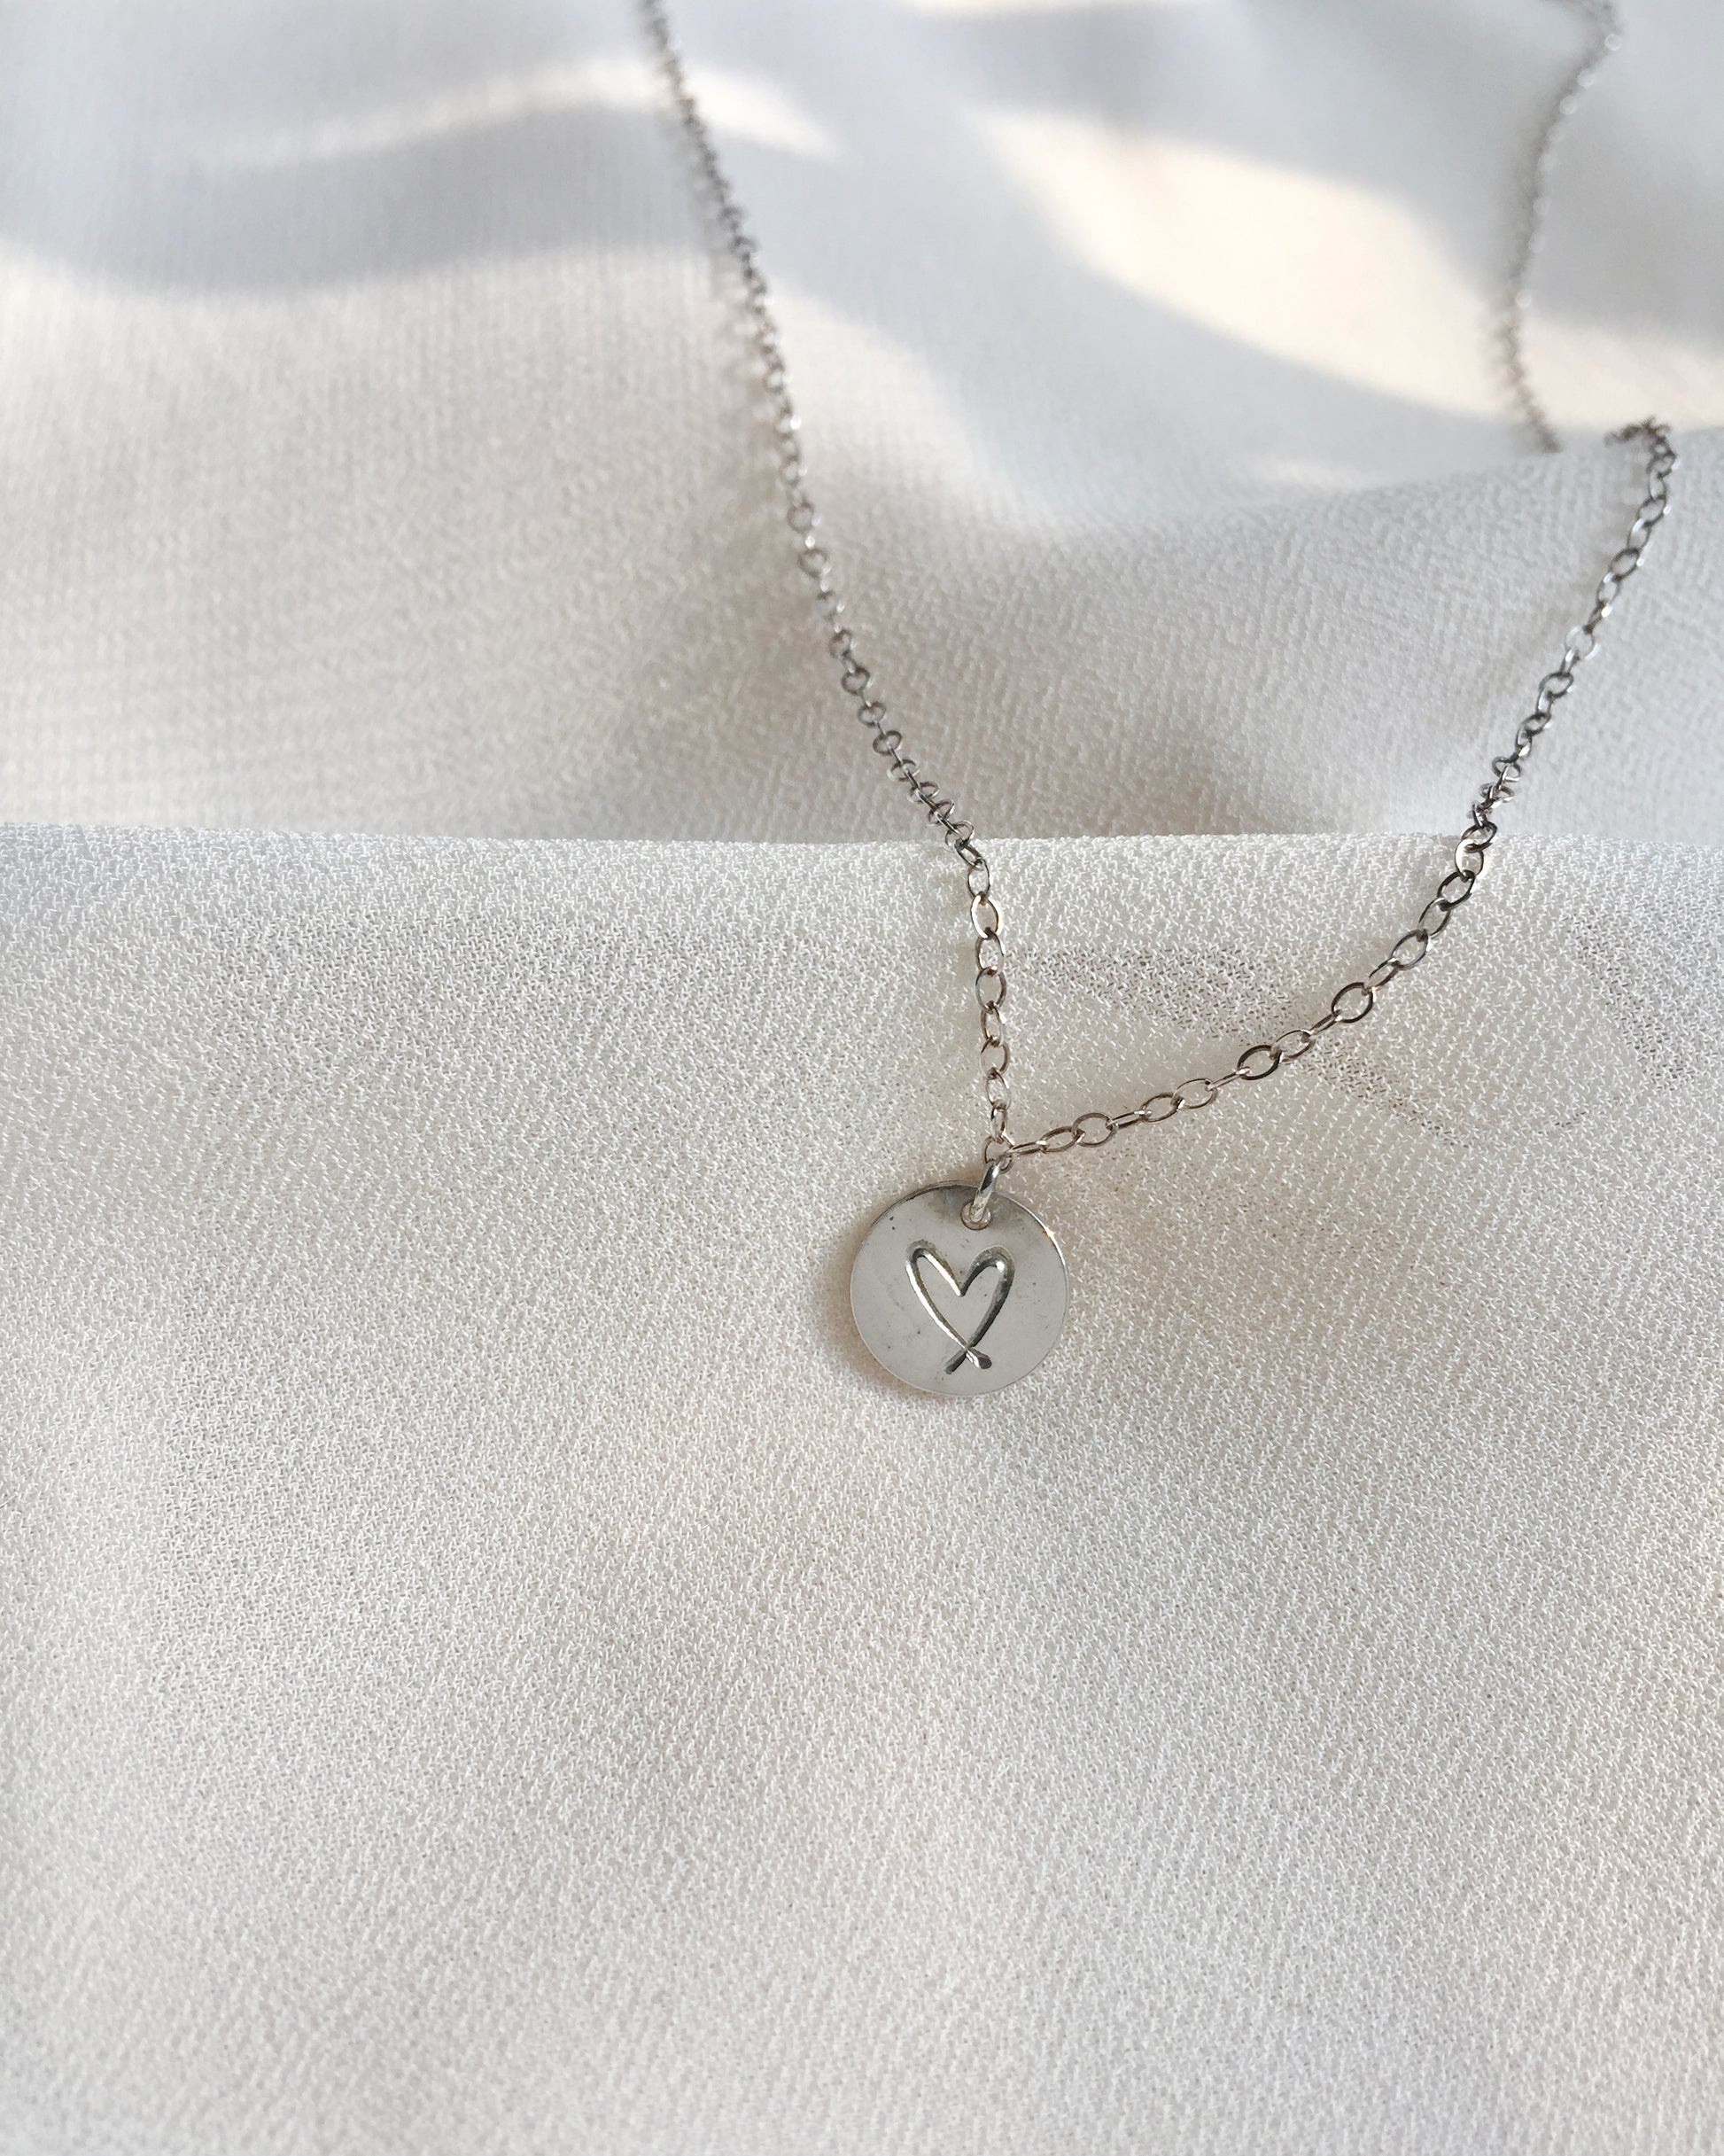 Small Dainty Heart Necklace | Delicate Everyday Necklace in Gold Filled or Sterling Silver | IB Jewelry